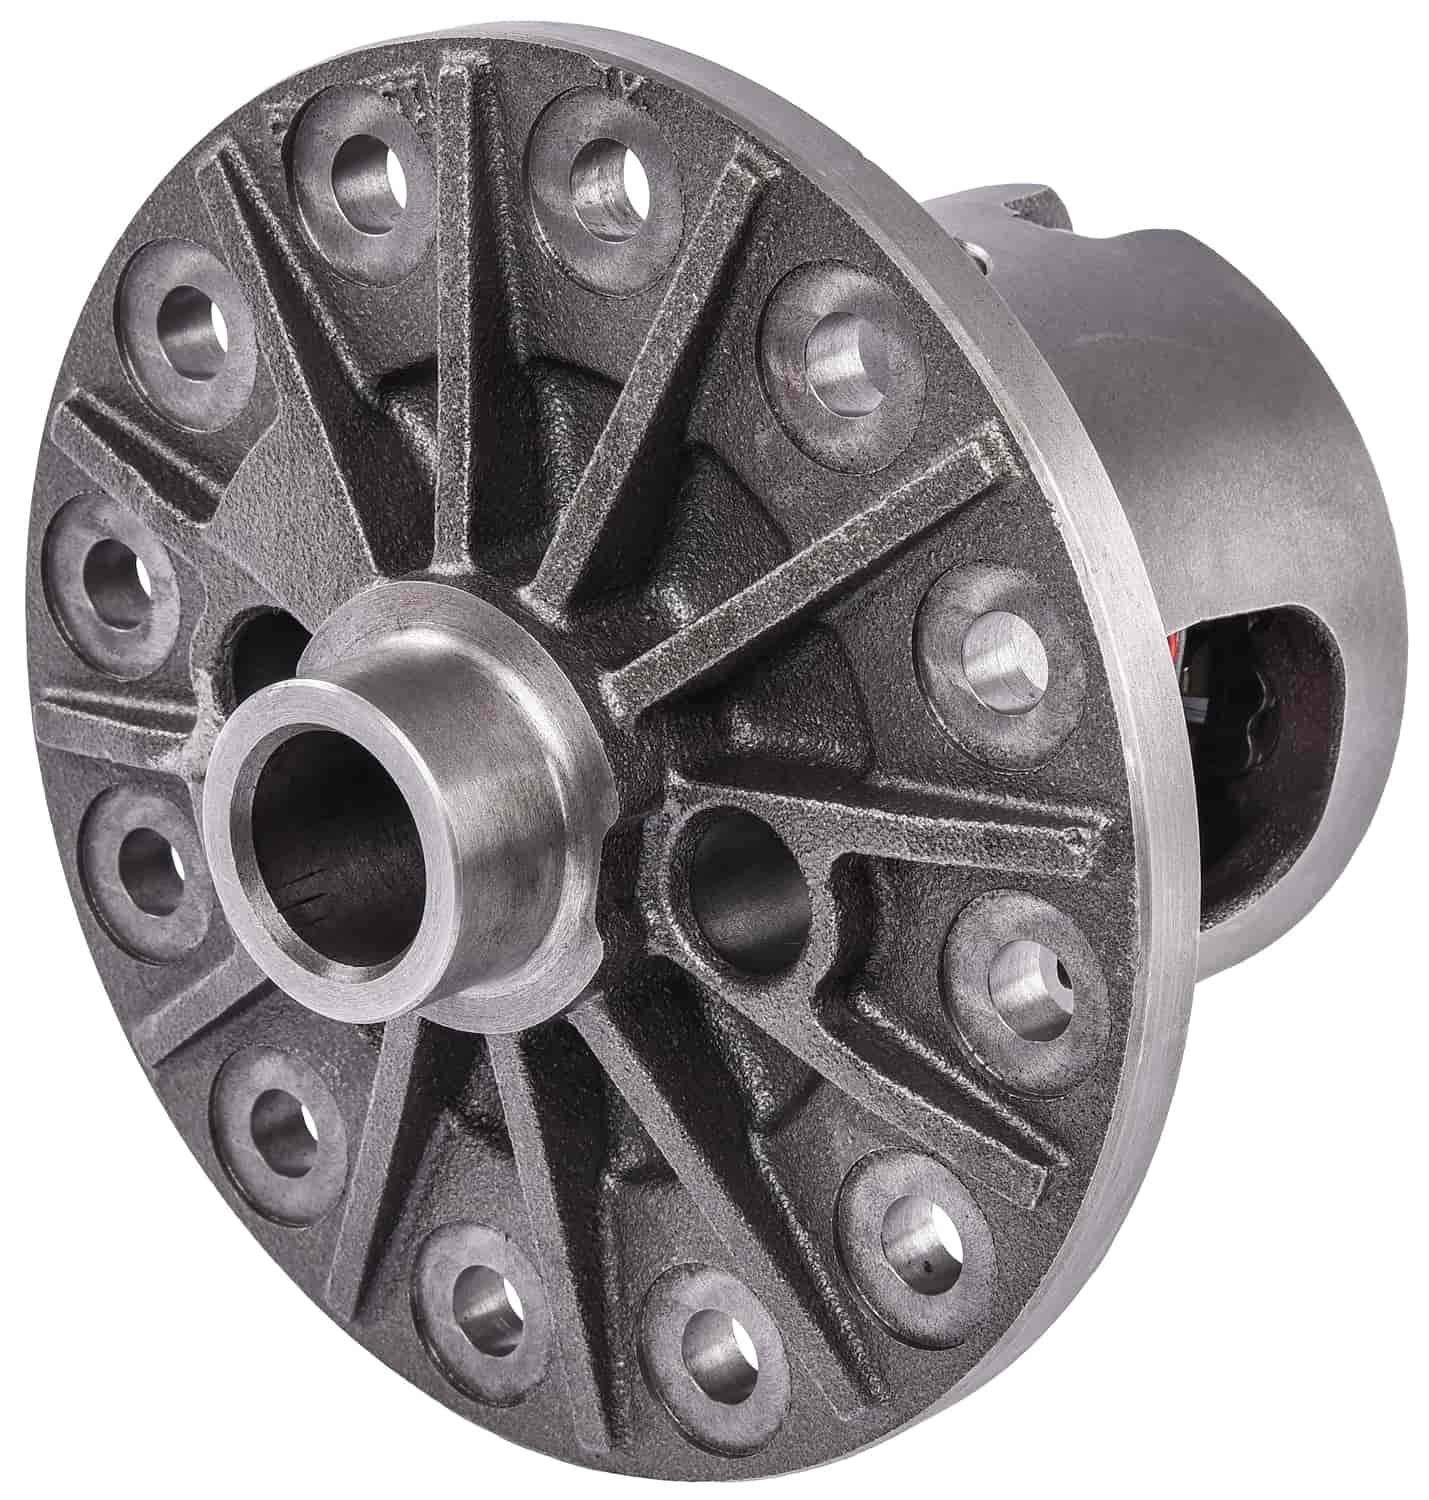 Posi Traction Differential for Ram Truck Rear, Chrysler